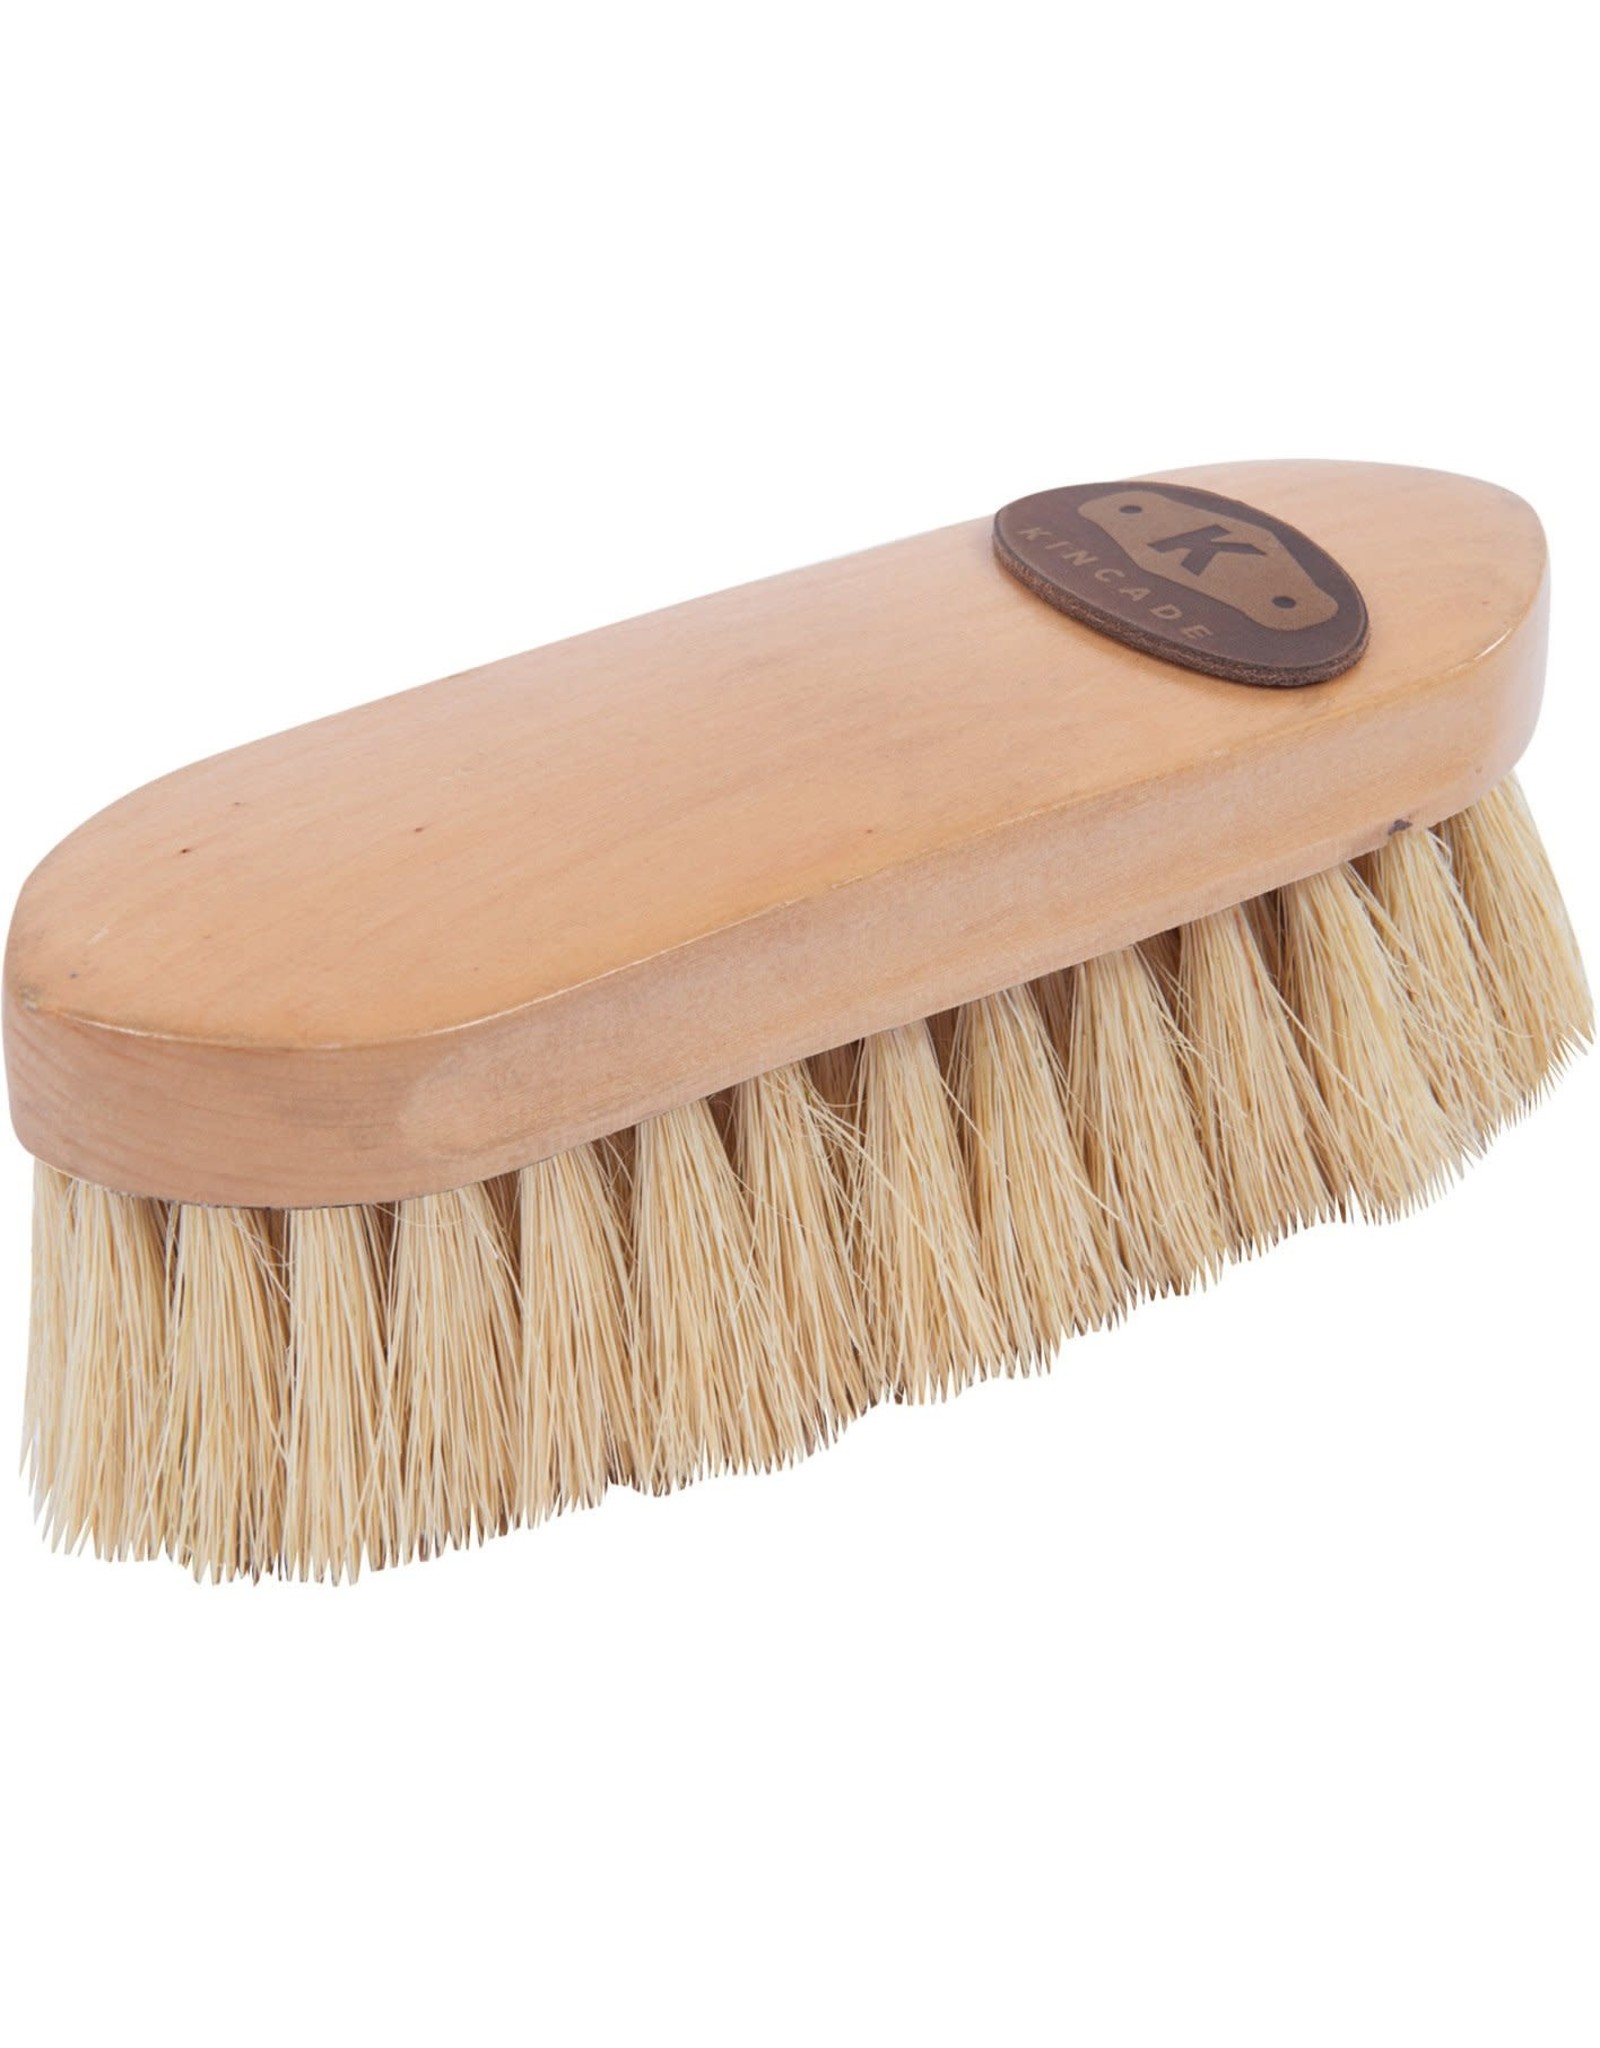 Wooden Deluxe Brush Natural Dandy Small